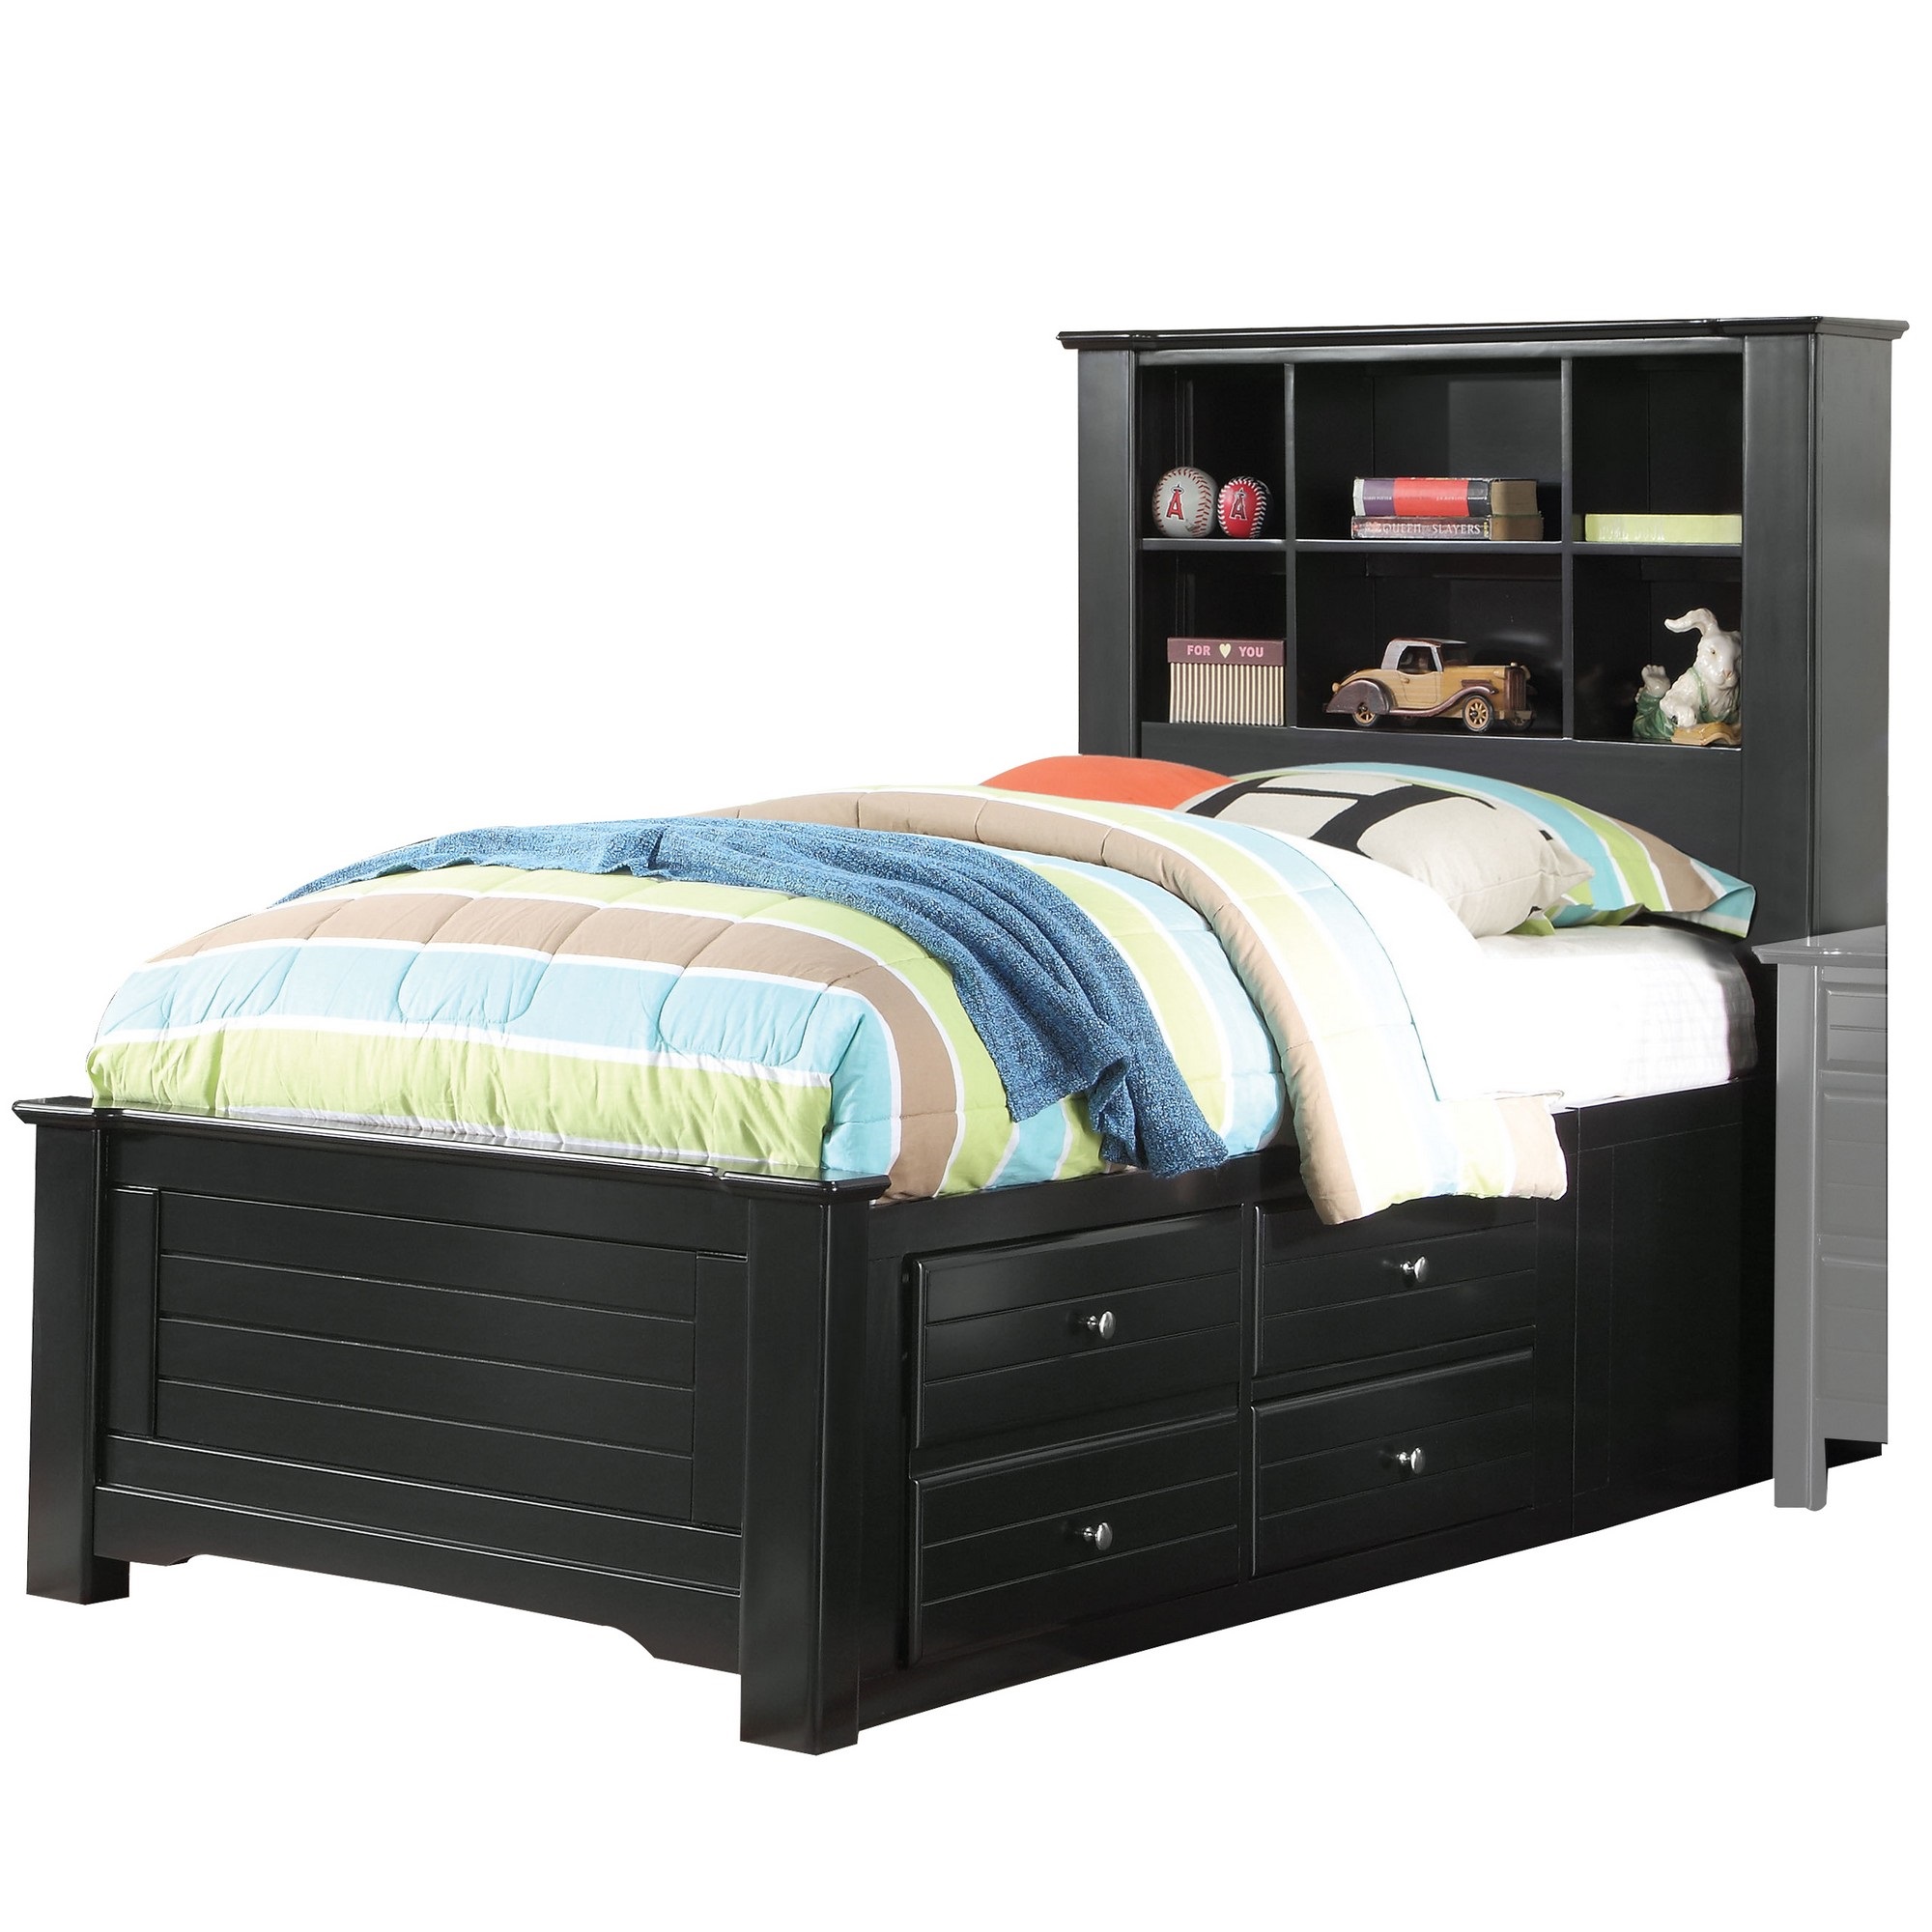 Storage Bed With Bookcase Headboard Black, Full Size Bed With Storage Drawers And Bookcase Headboard